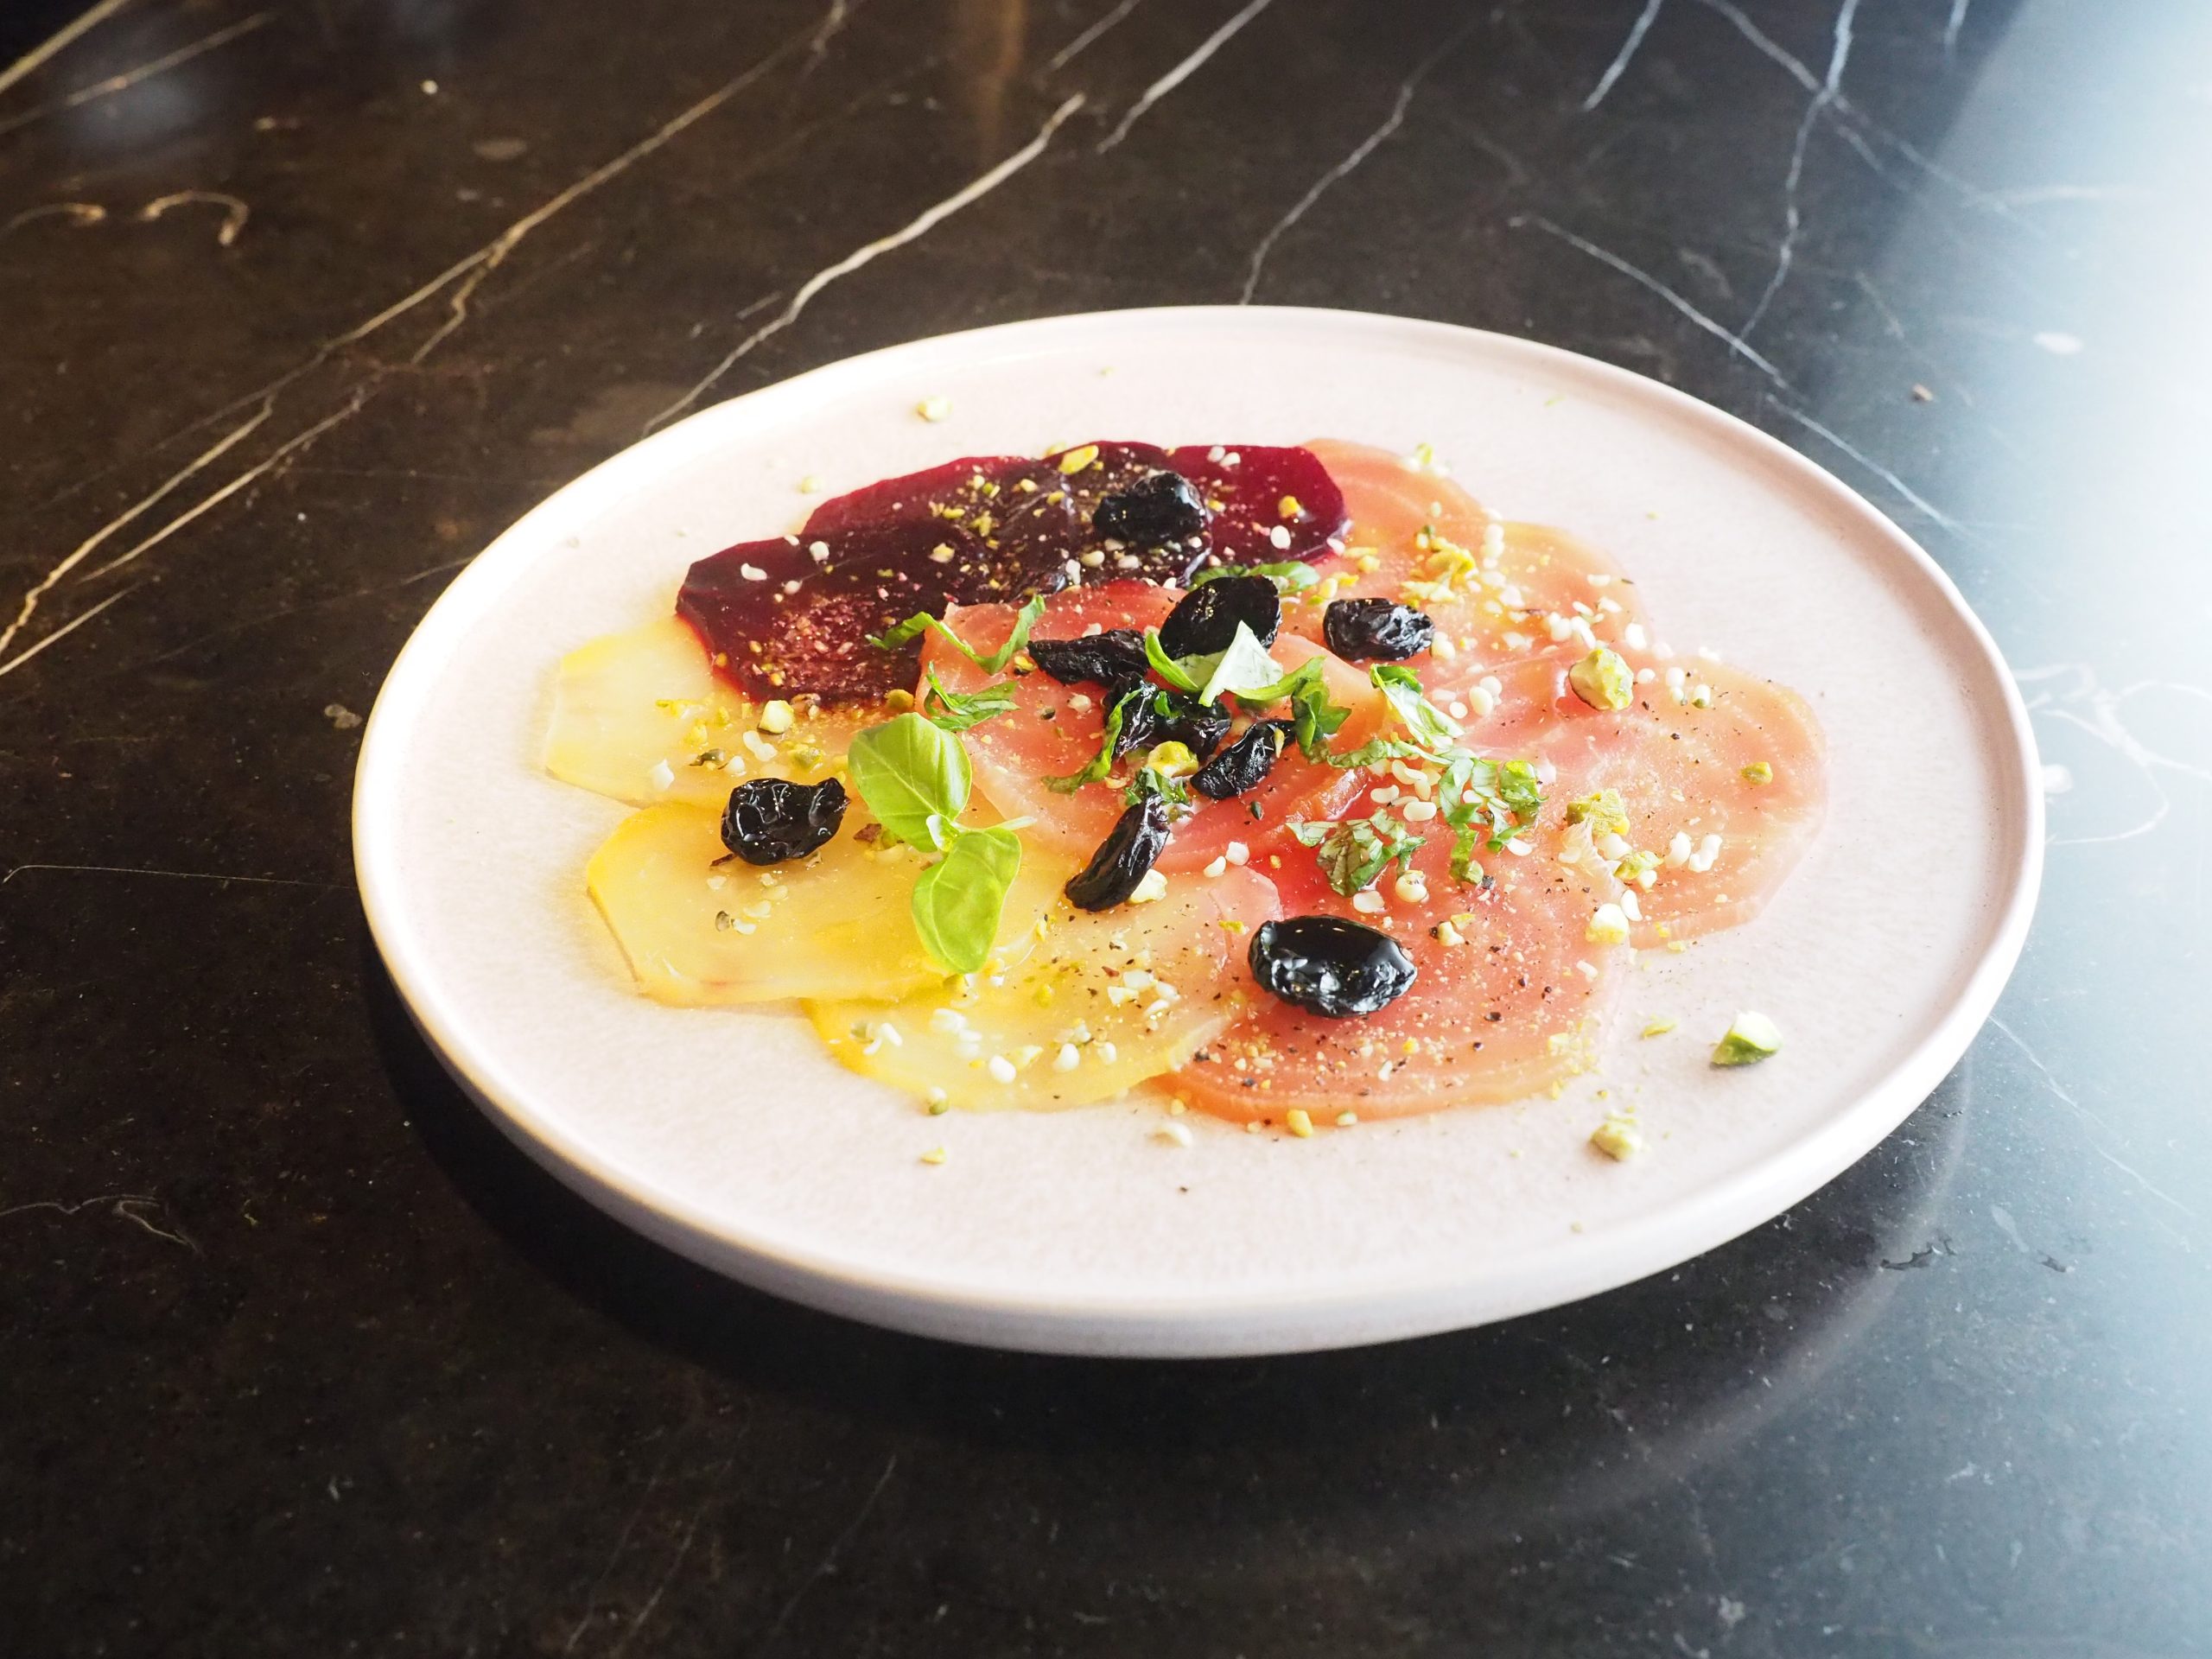 Beetroot carpaccio with oven-dried grapes